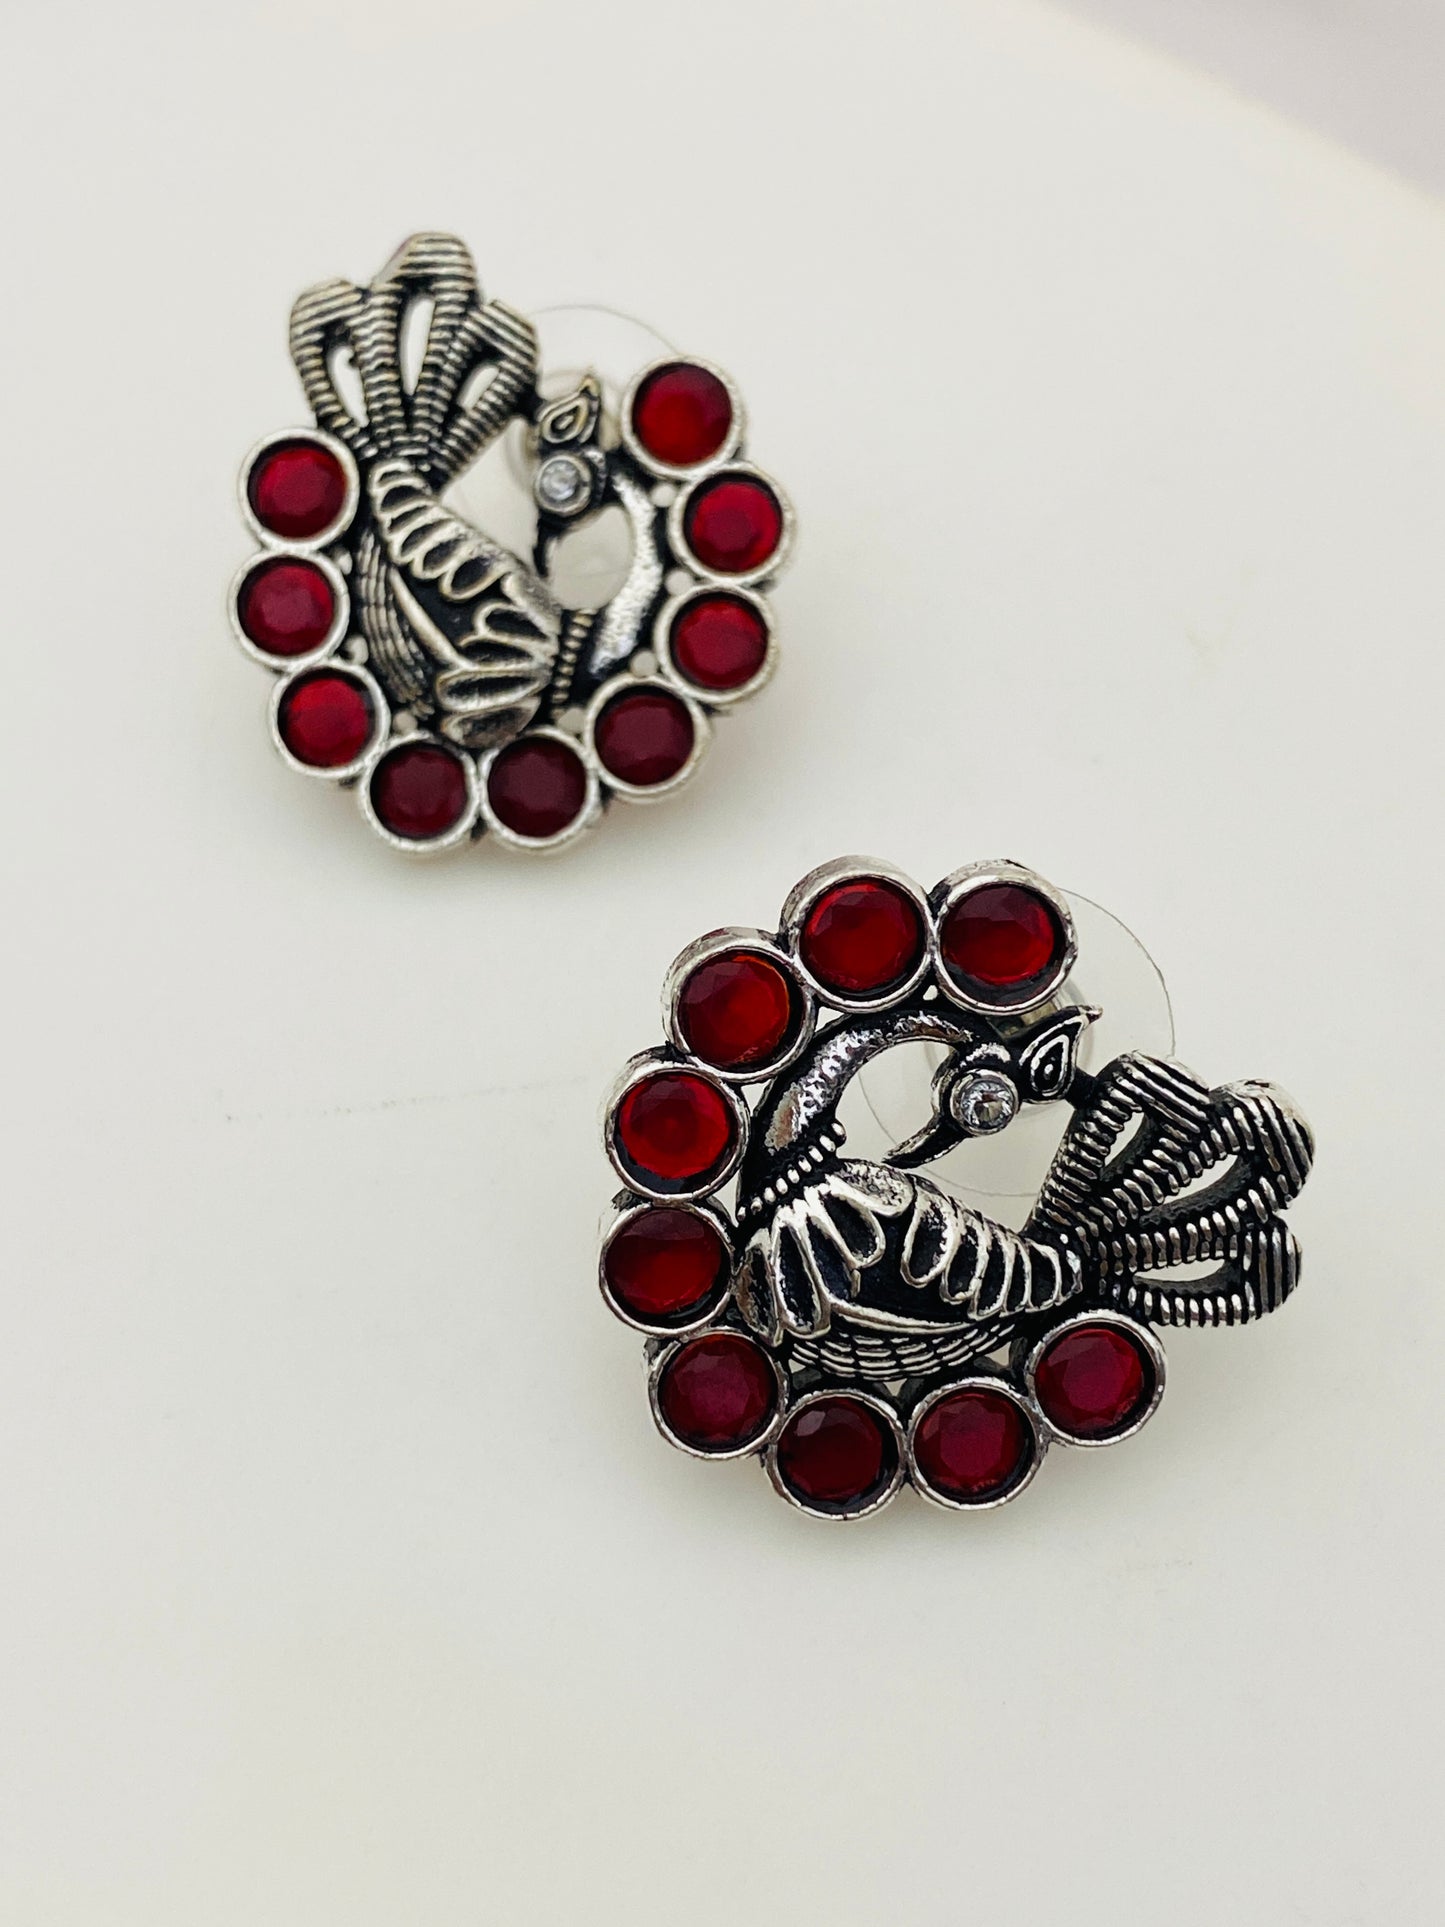 Appealing Red Stone Studded Peacock Designed Silver Toned Oxidized Stud Earrings